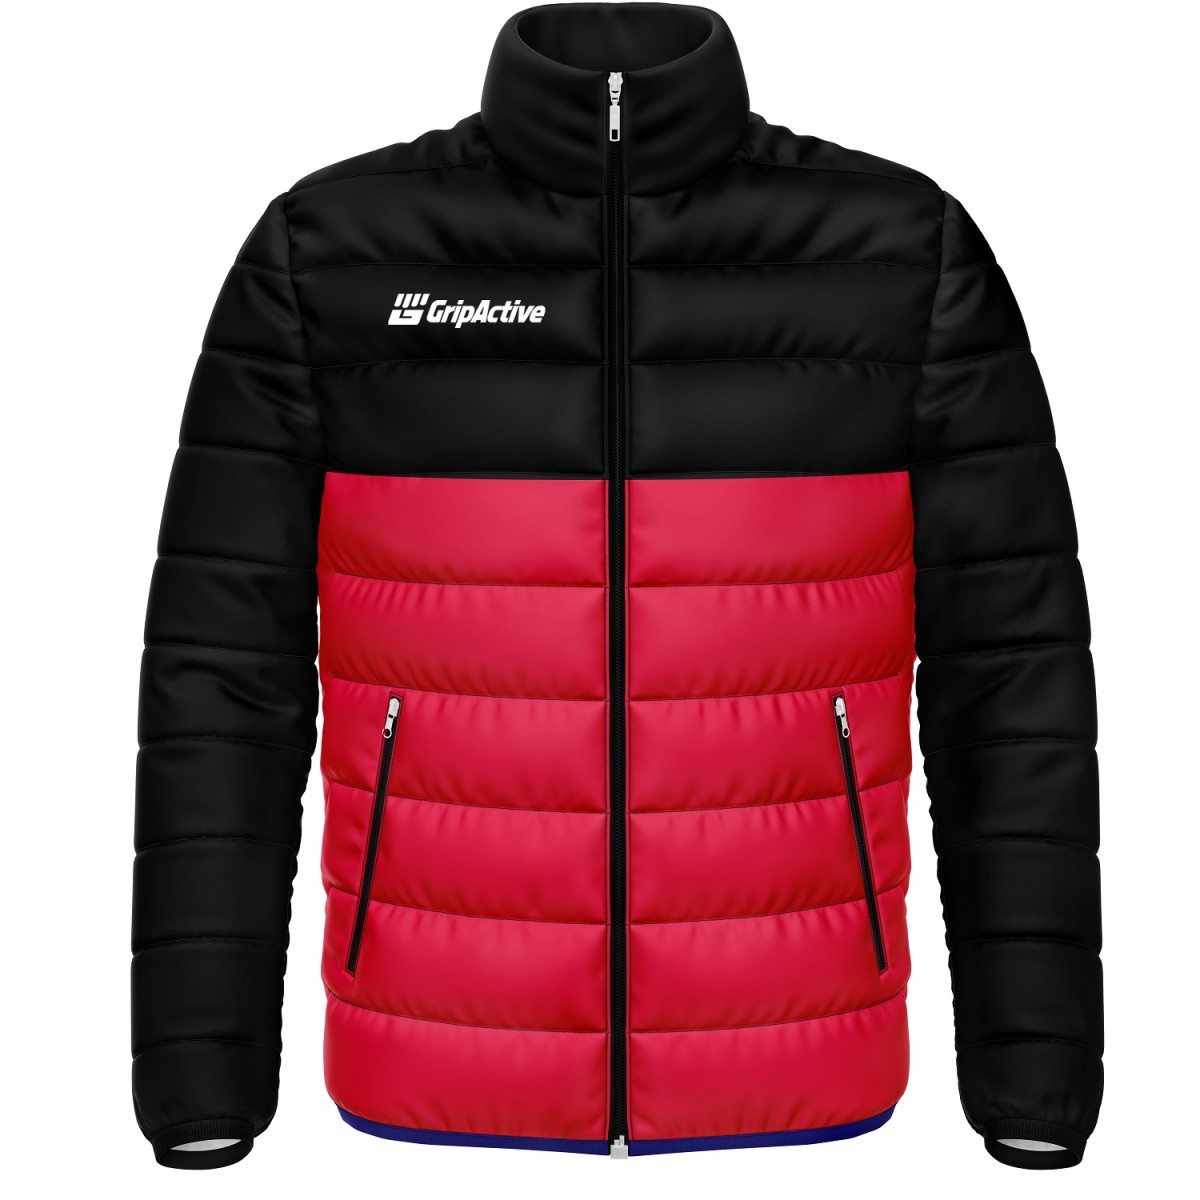 Grip Active Black And Red Colour Padded Jacket